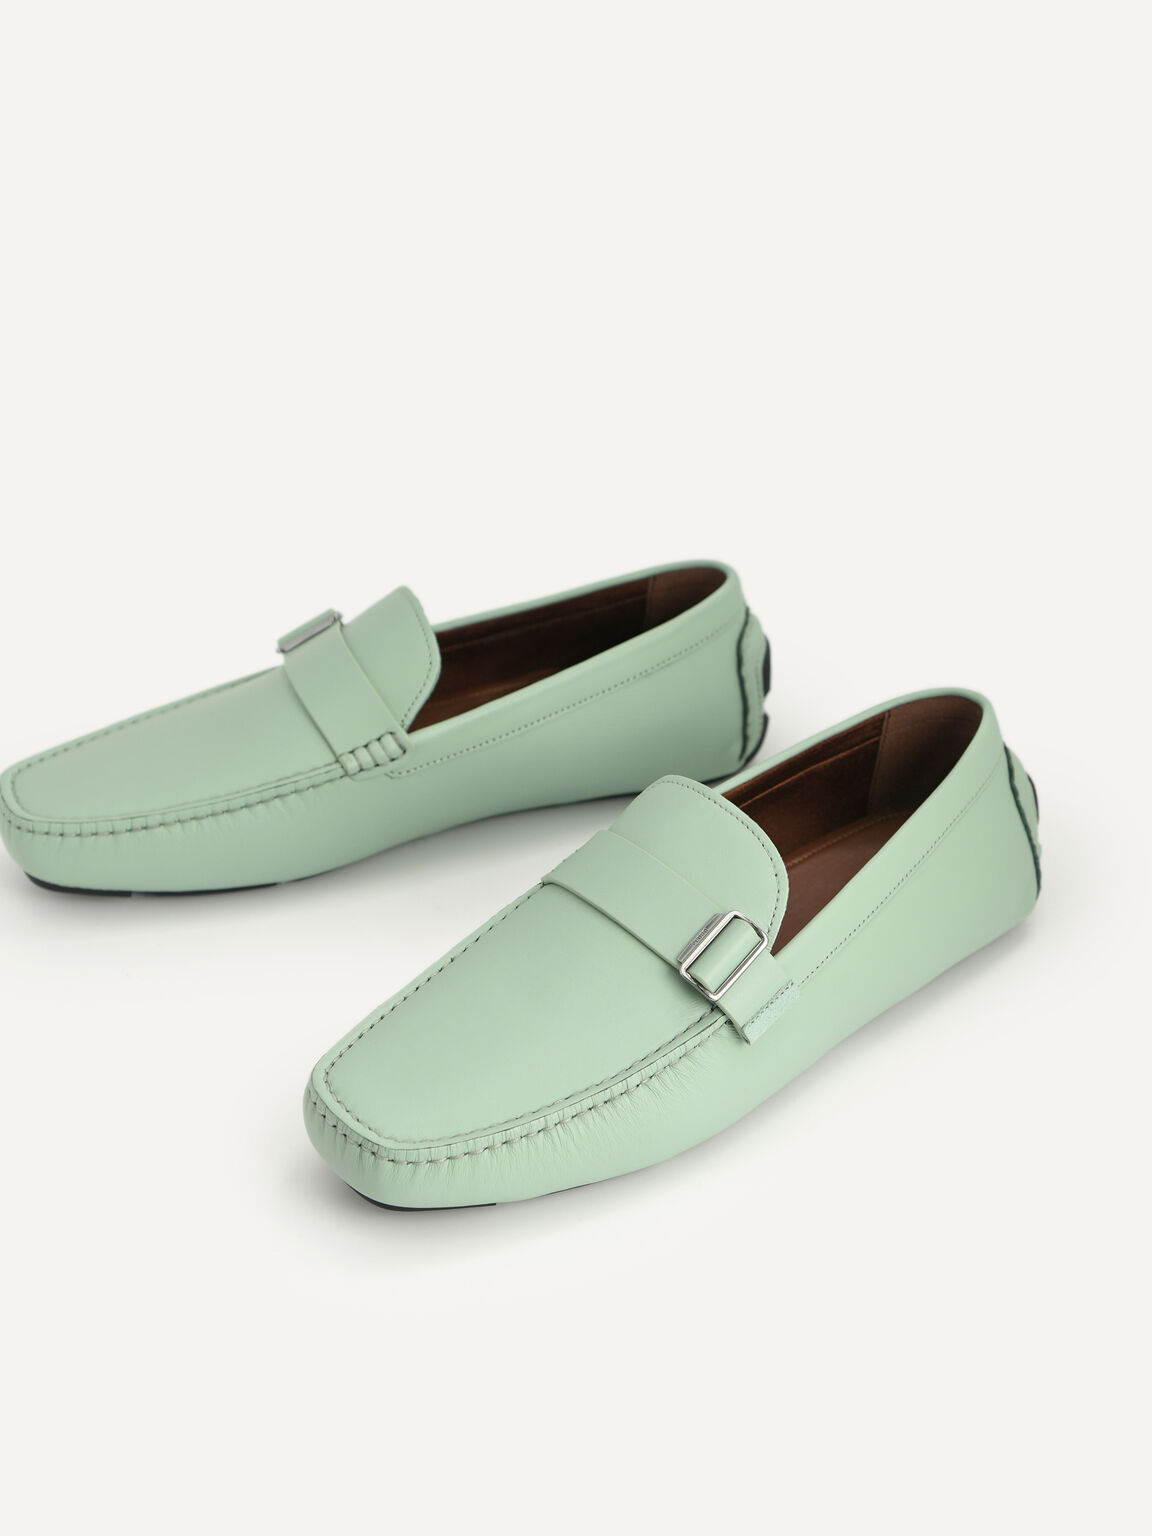 Leather Moccasins with Buckle Detail, Light Green, hi-res